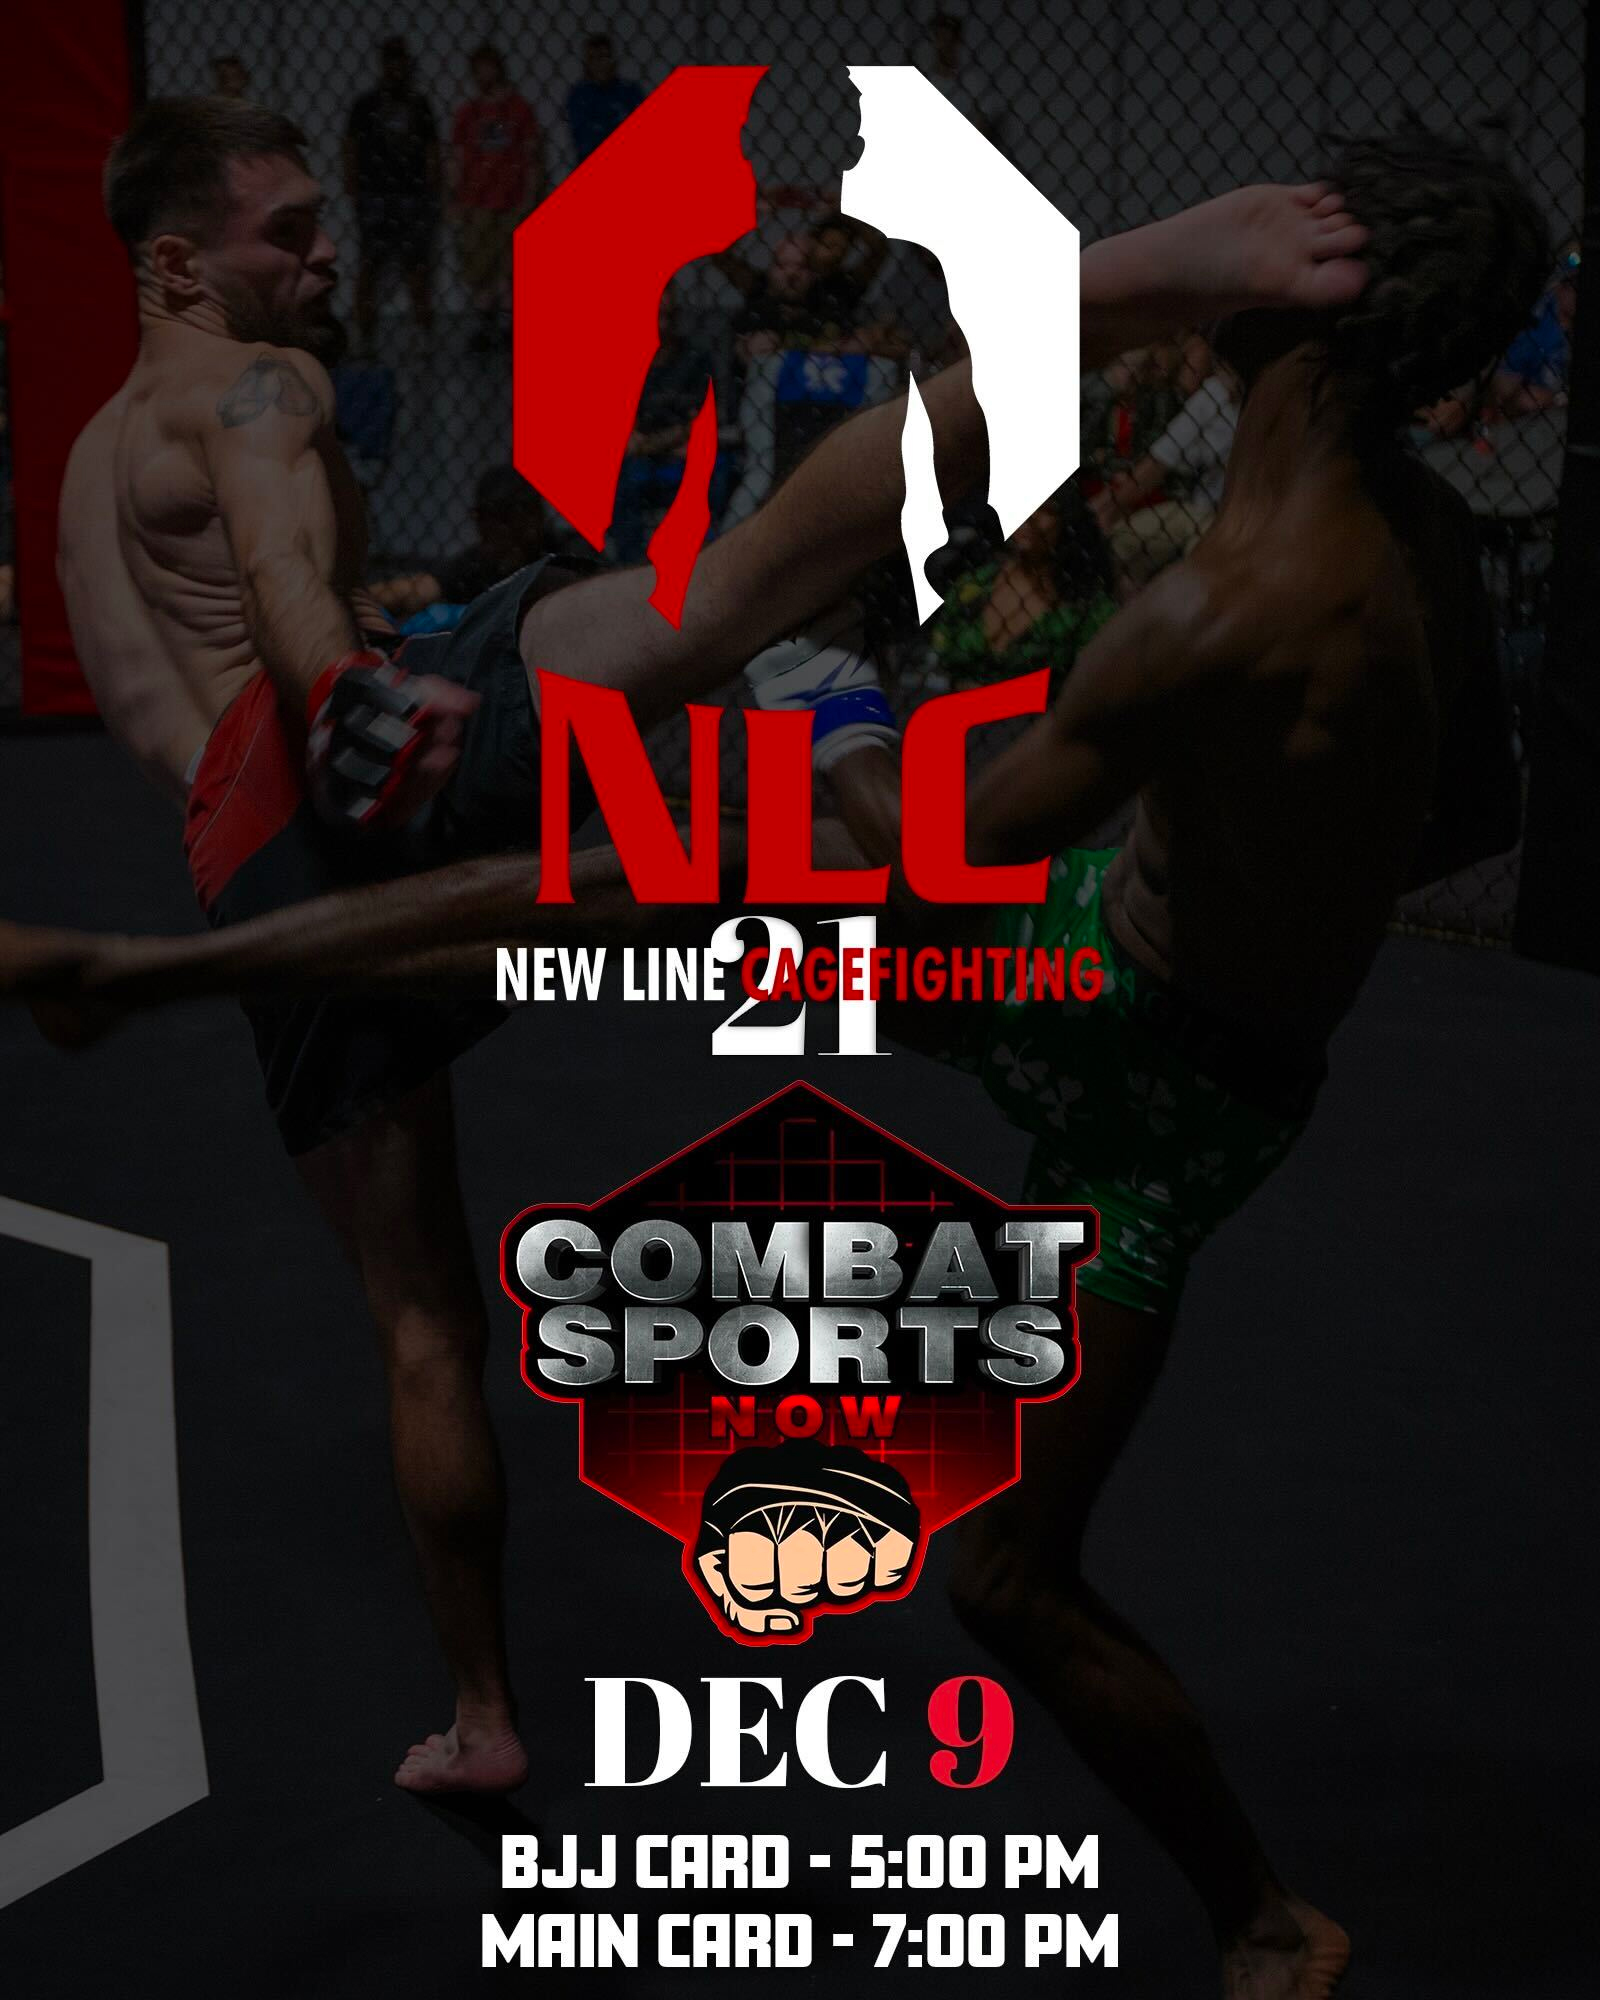 Watch New Line Cagefighting 21 on Combat Sports Now